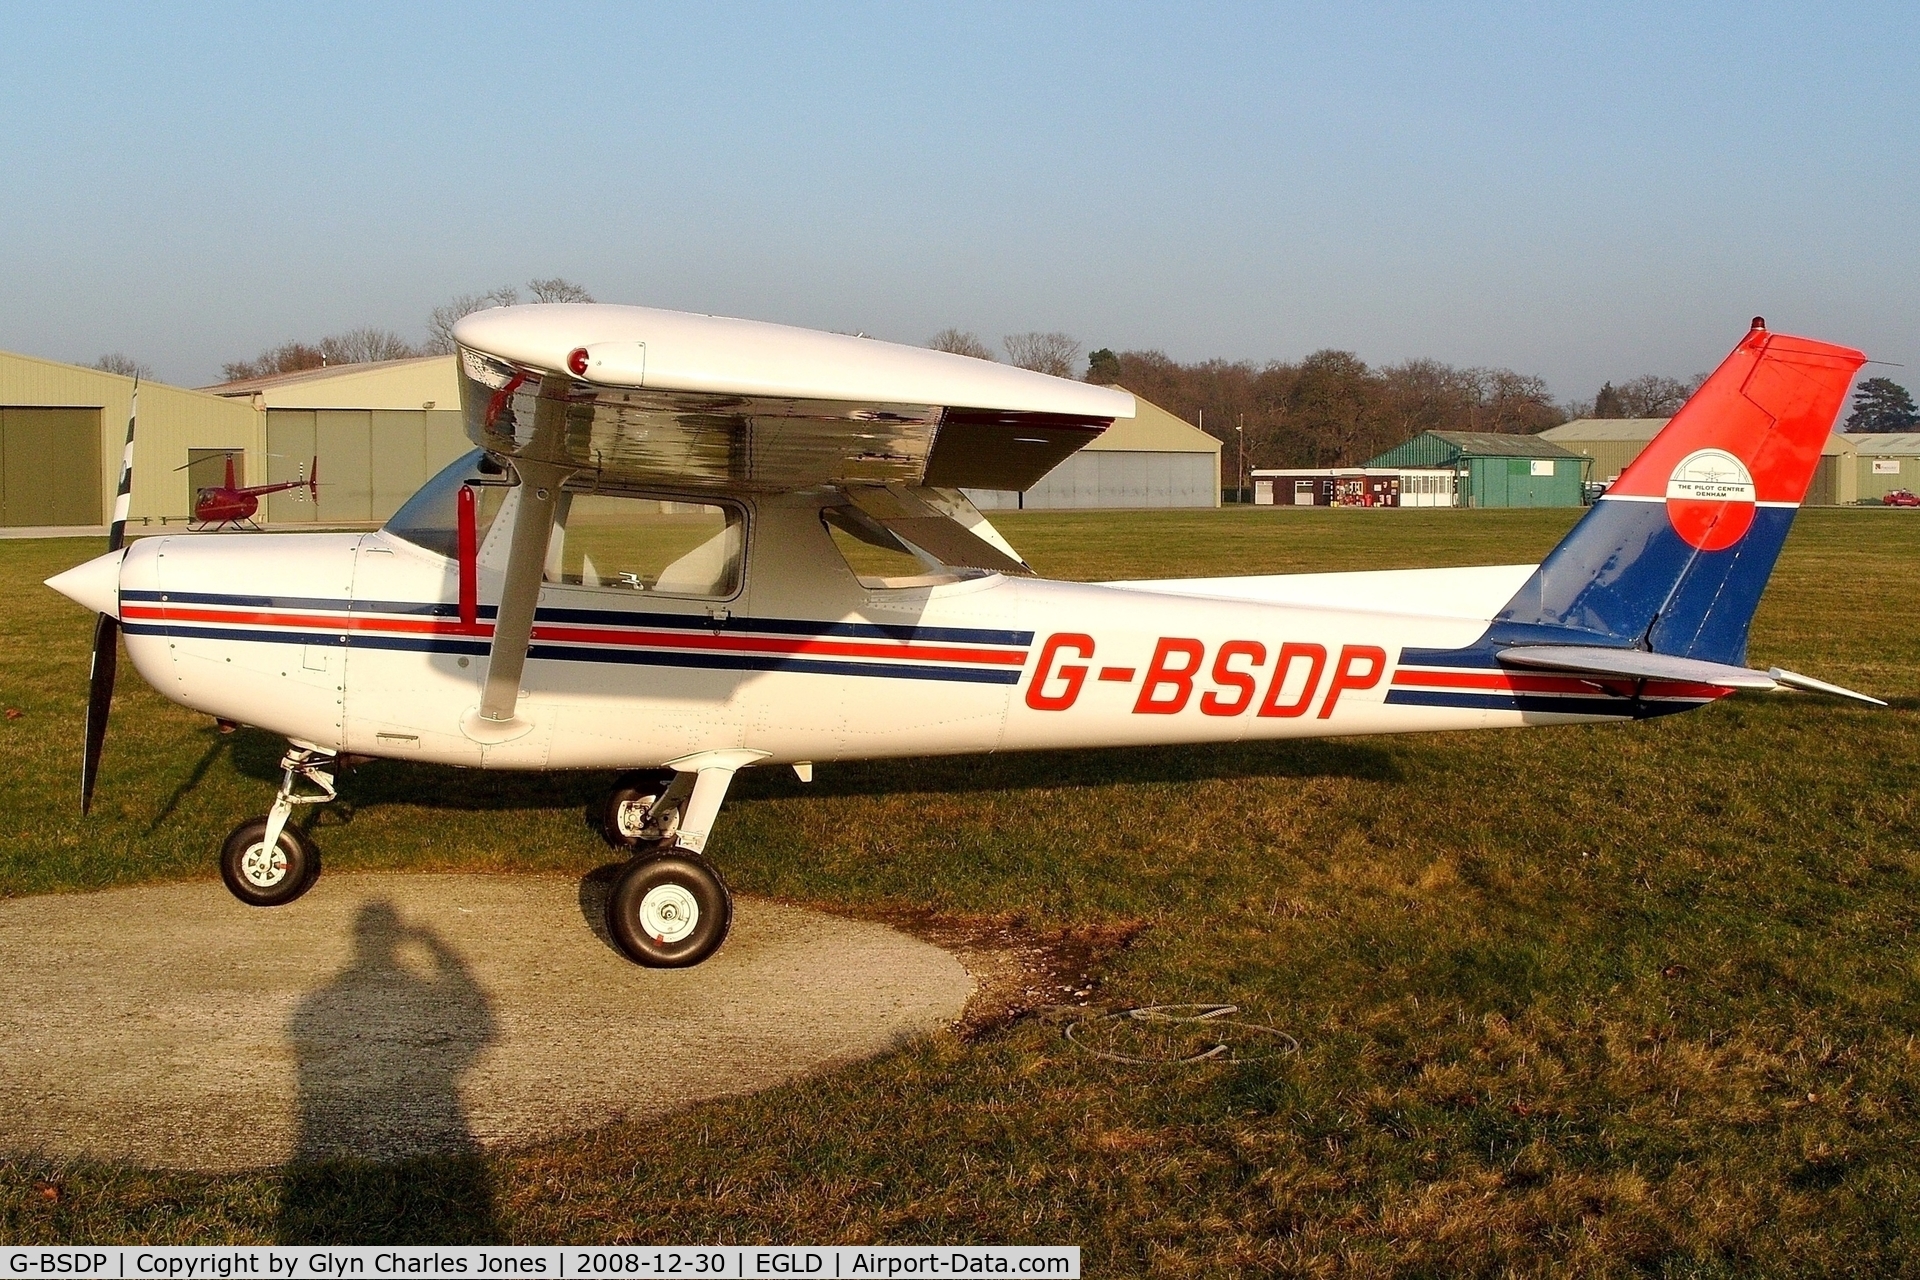 G-BSDP, 1977 Cessna 152 C/N 152-80268, Previously N24468. The low mid-winter sun brings out the colours. Operated by The Pilot Centre Denham. With thanks to The Pilot Centre.